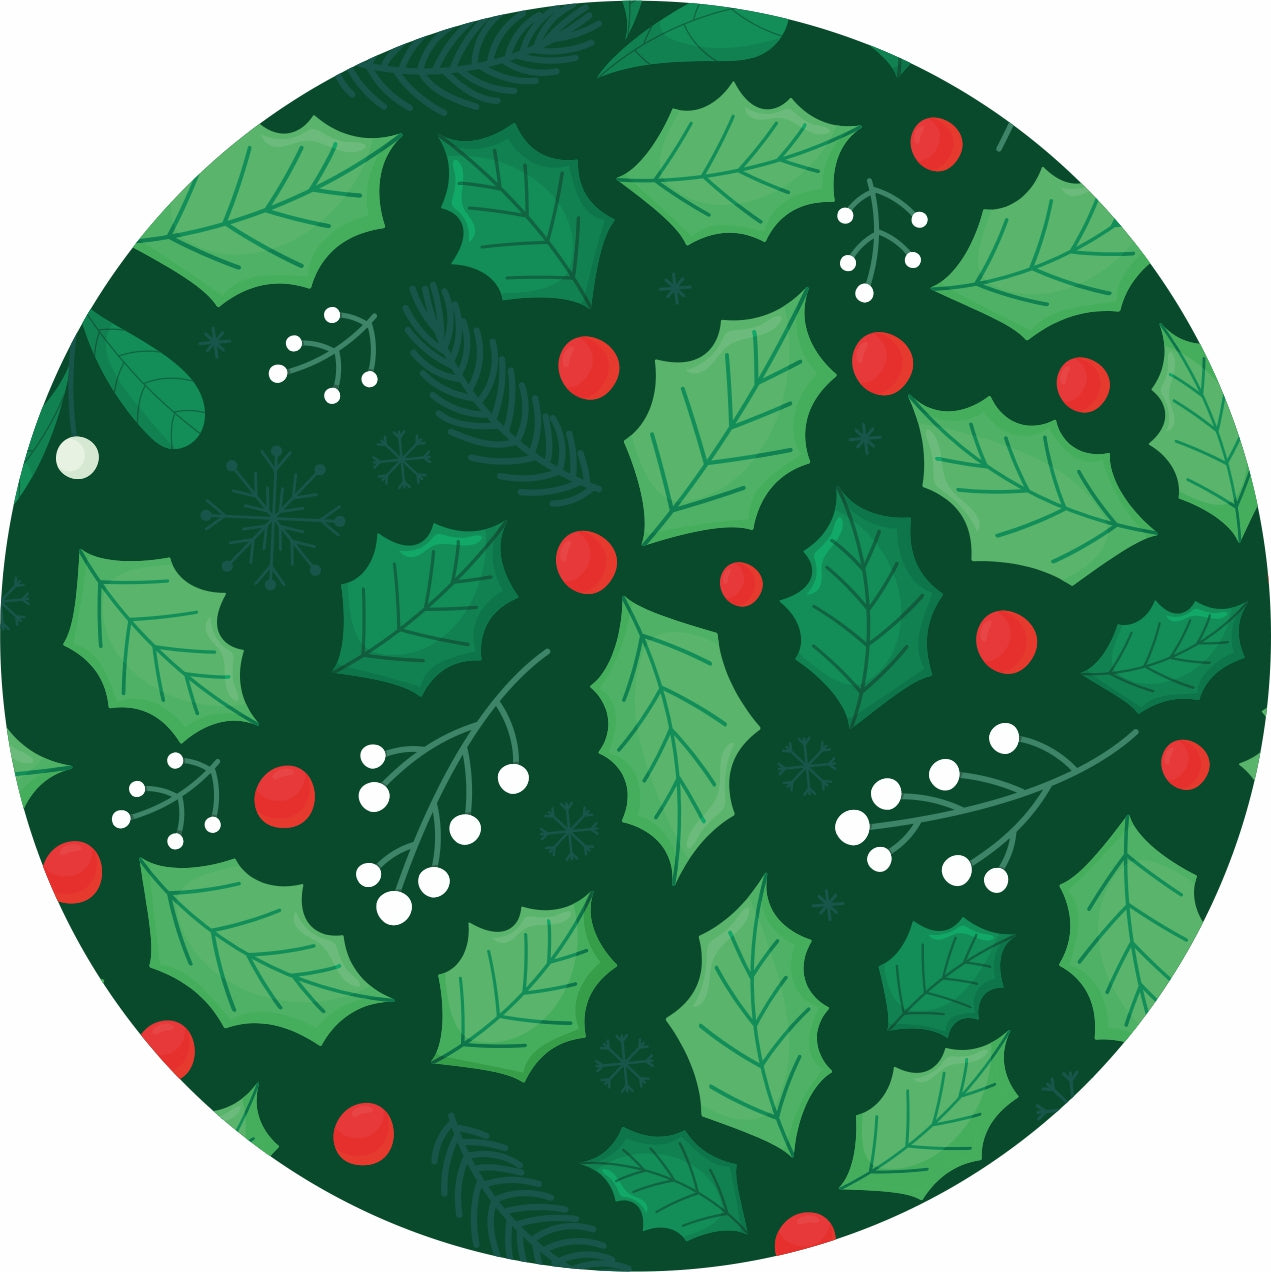 Foil Printed Christmas Coaster - 4inch dia, Holly Berries, 12pc